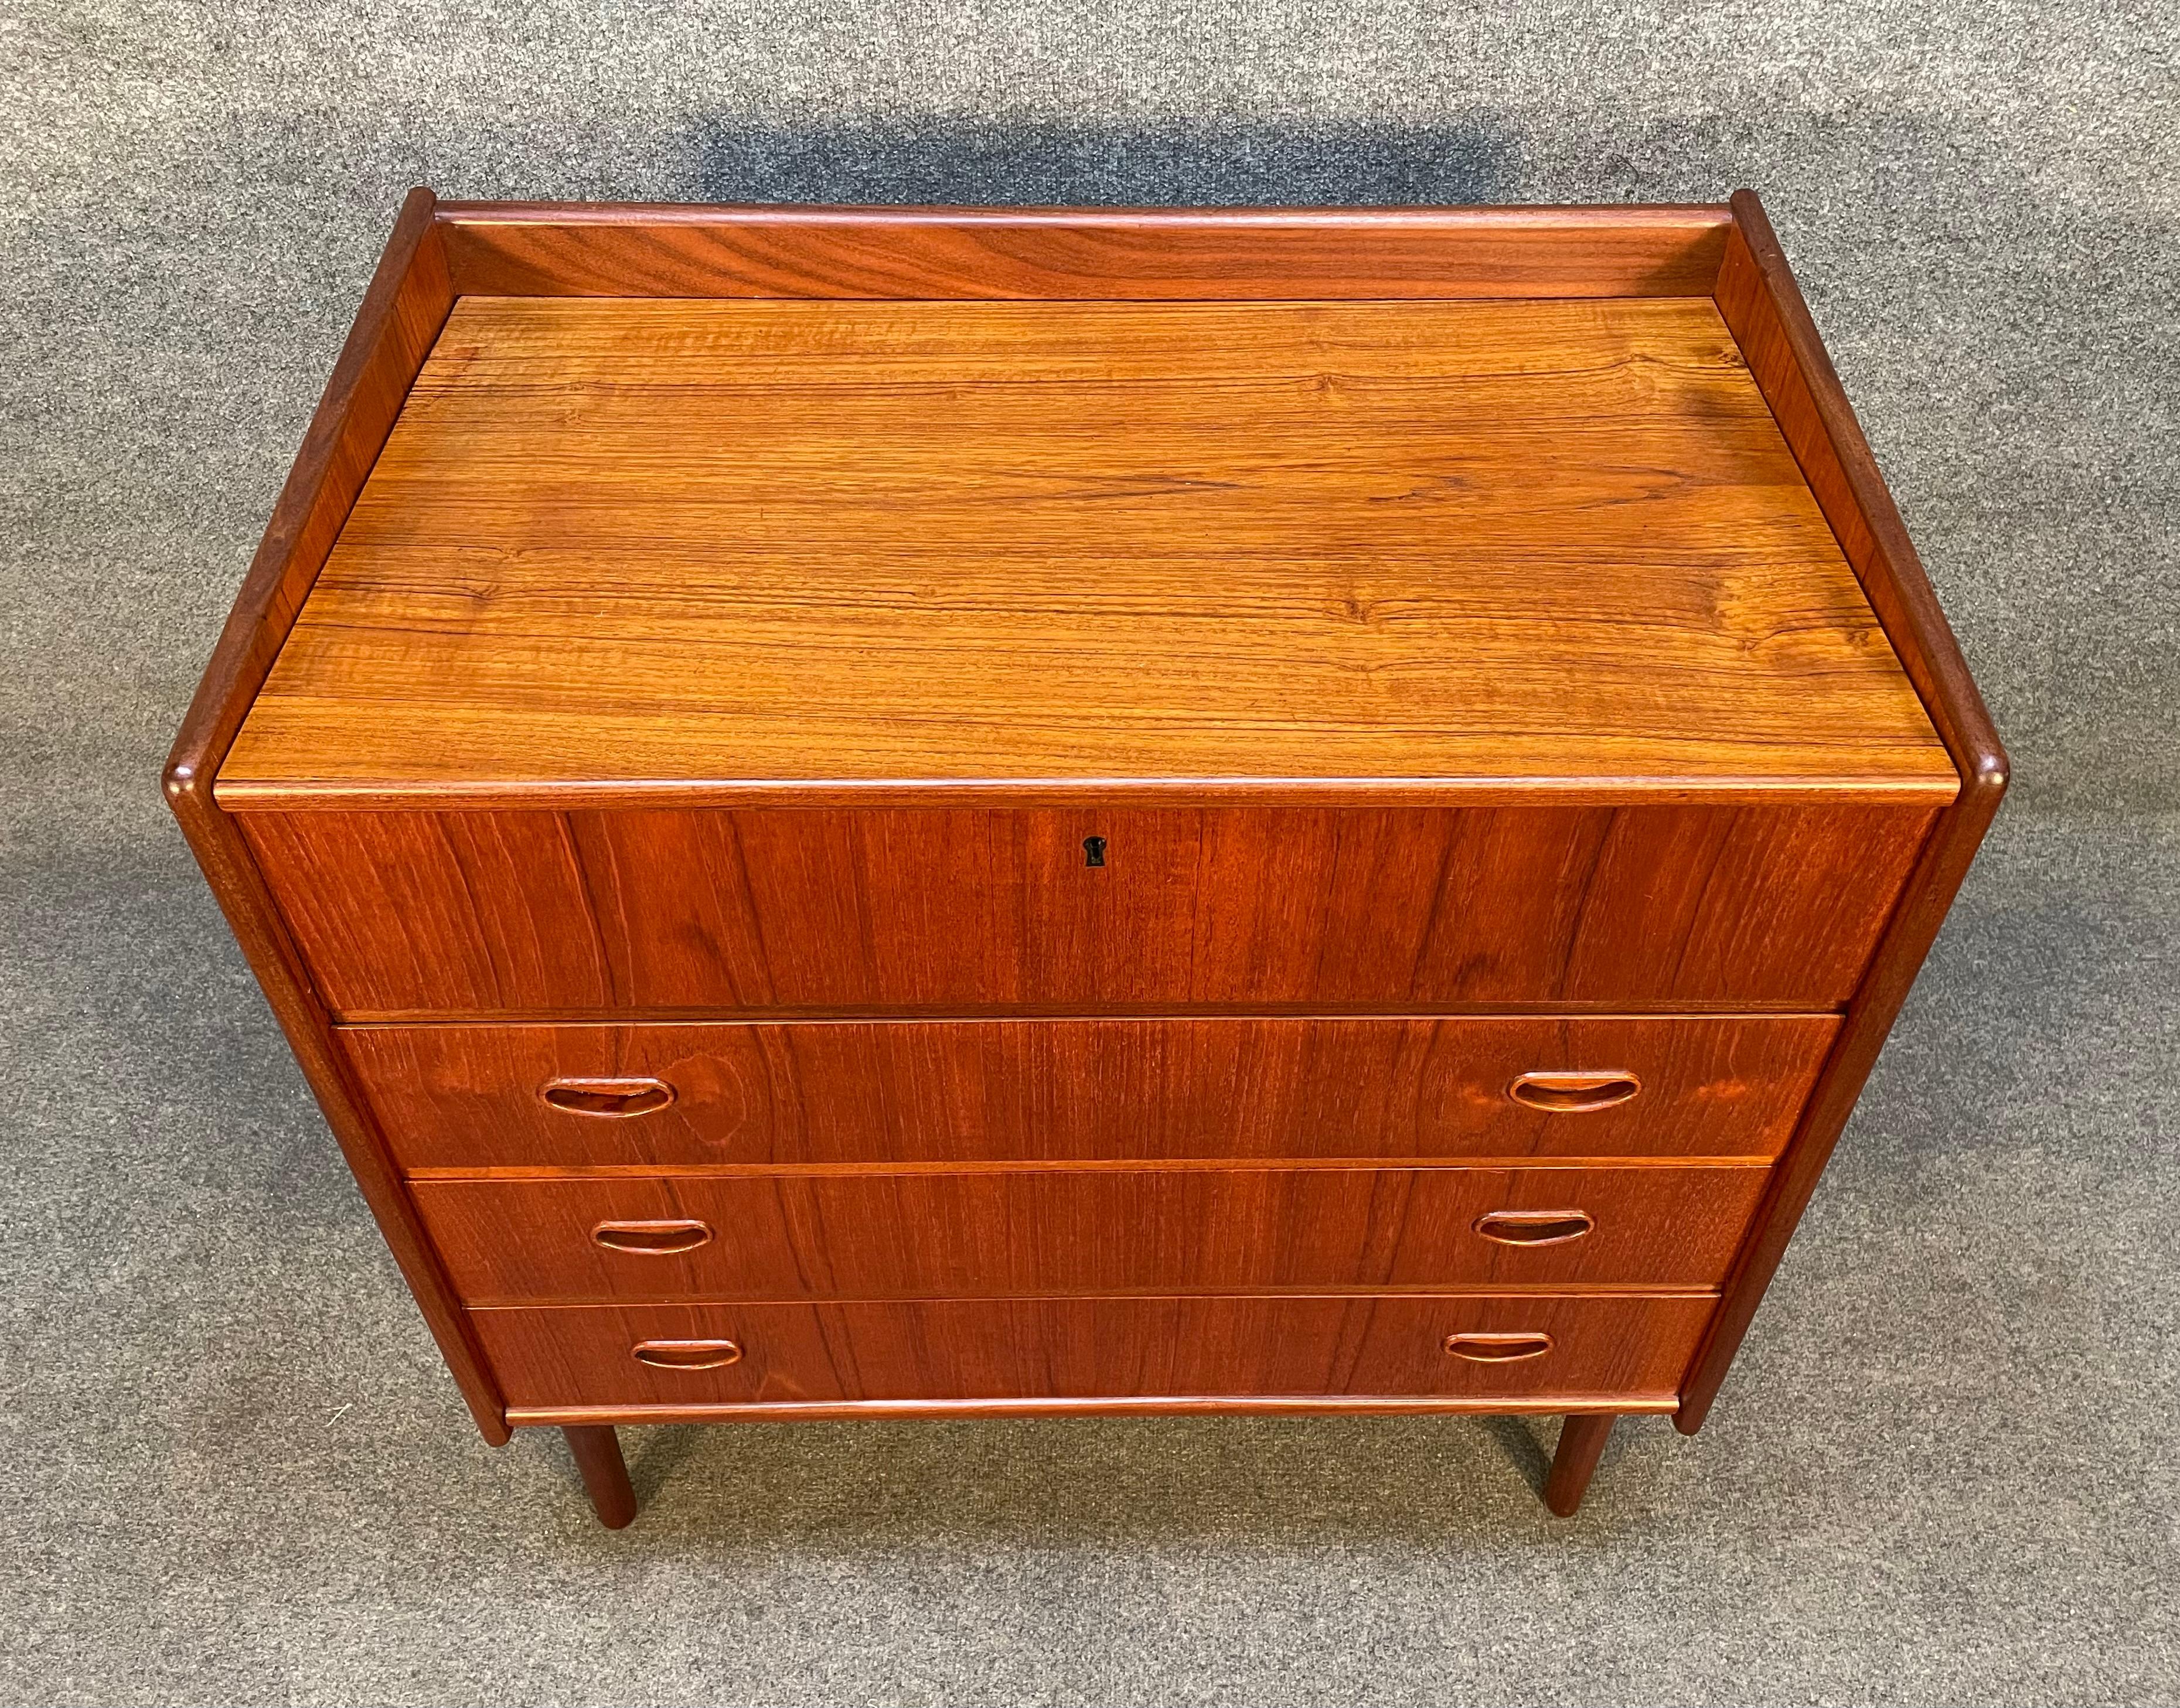 Here is a beautiful Scandinavian Modern low-boy dresser - vanity in teak wood reminiscent of Peter Hvidt's designed and manufactured in Denmark in the 1960s 
This versatile piece, recently imported from Europe ton California before its refinishing,